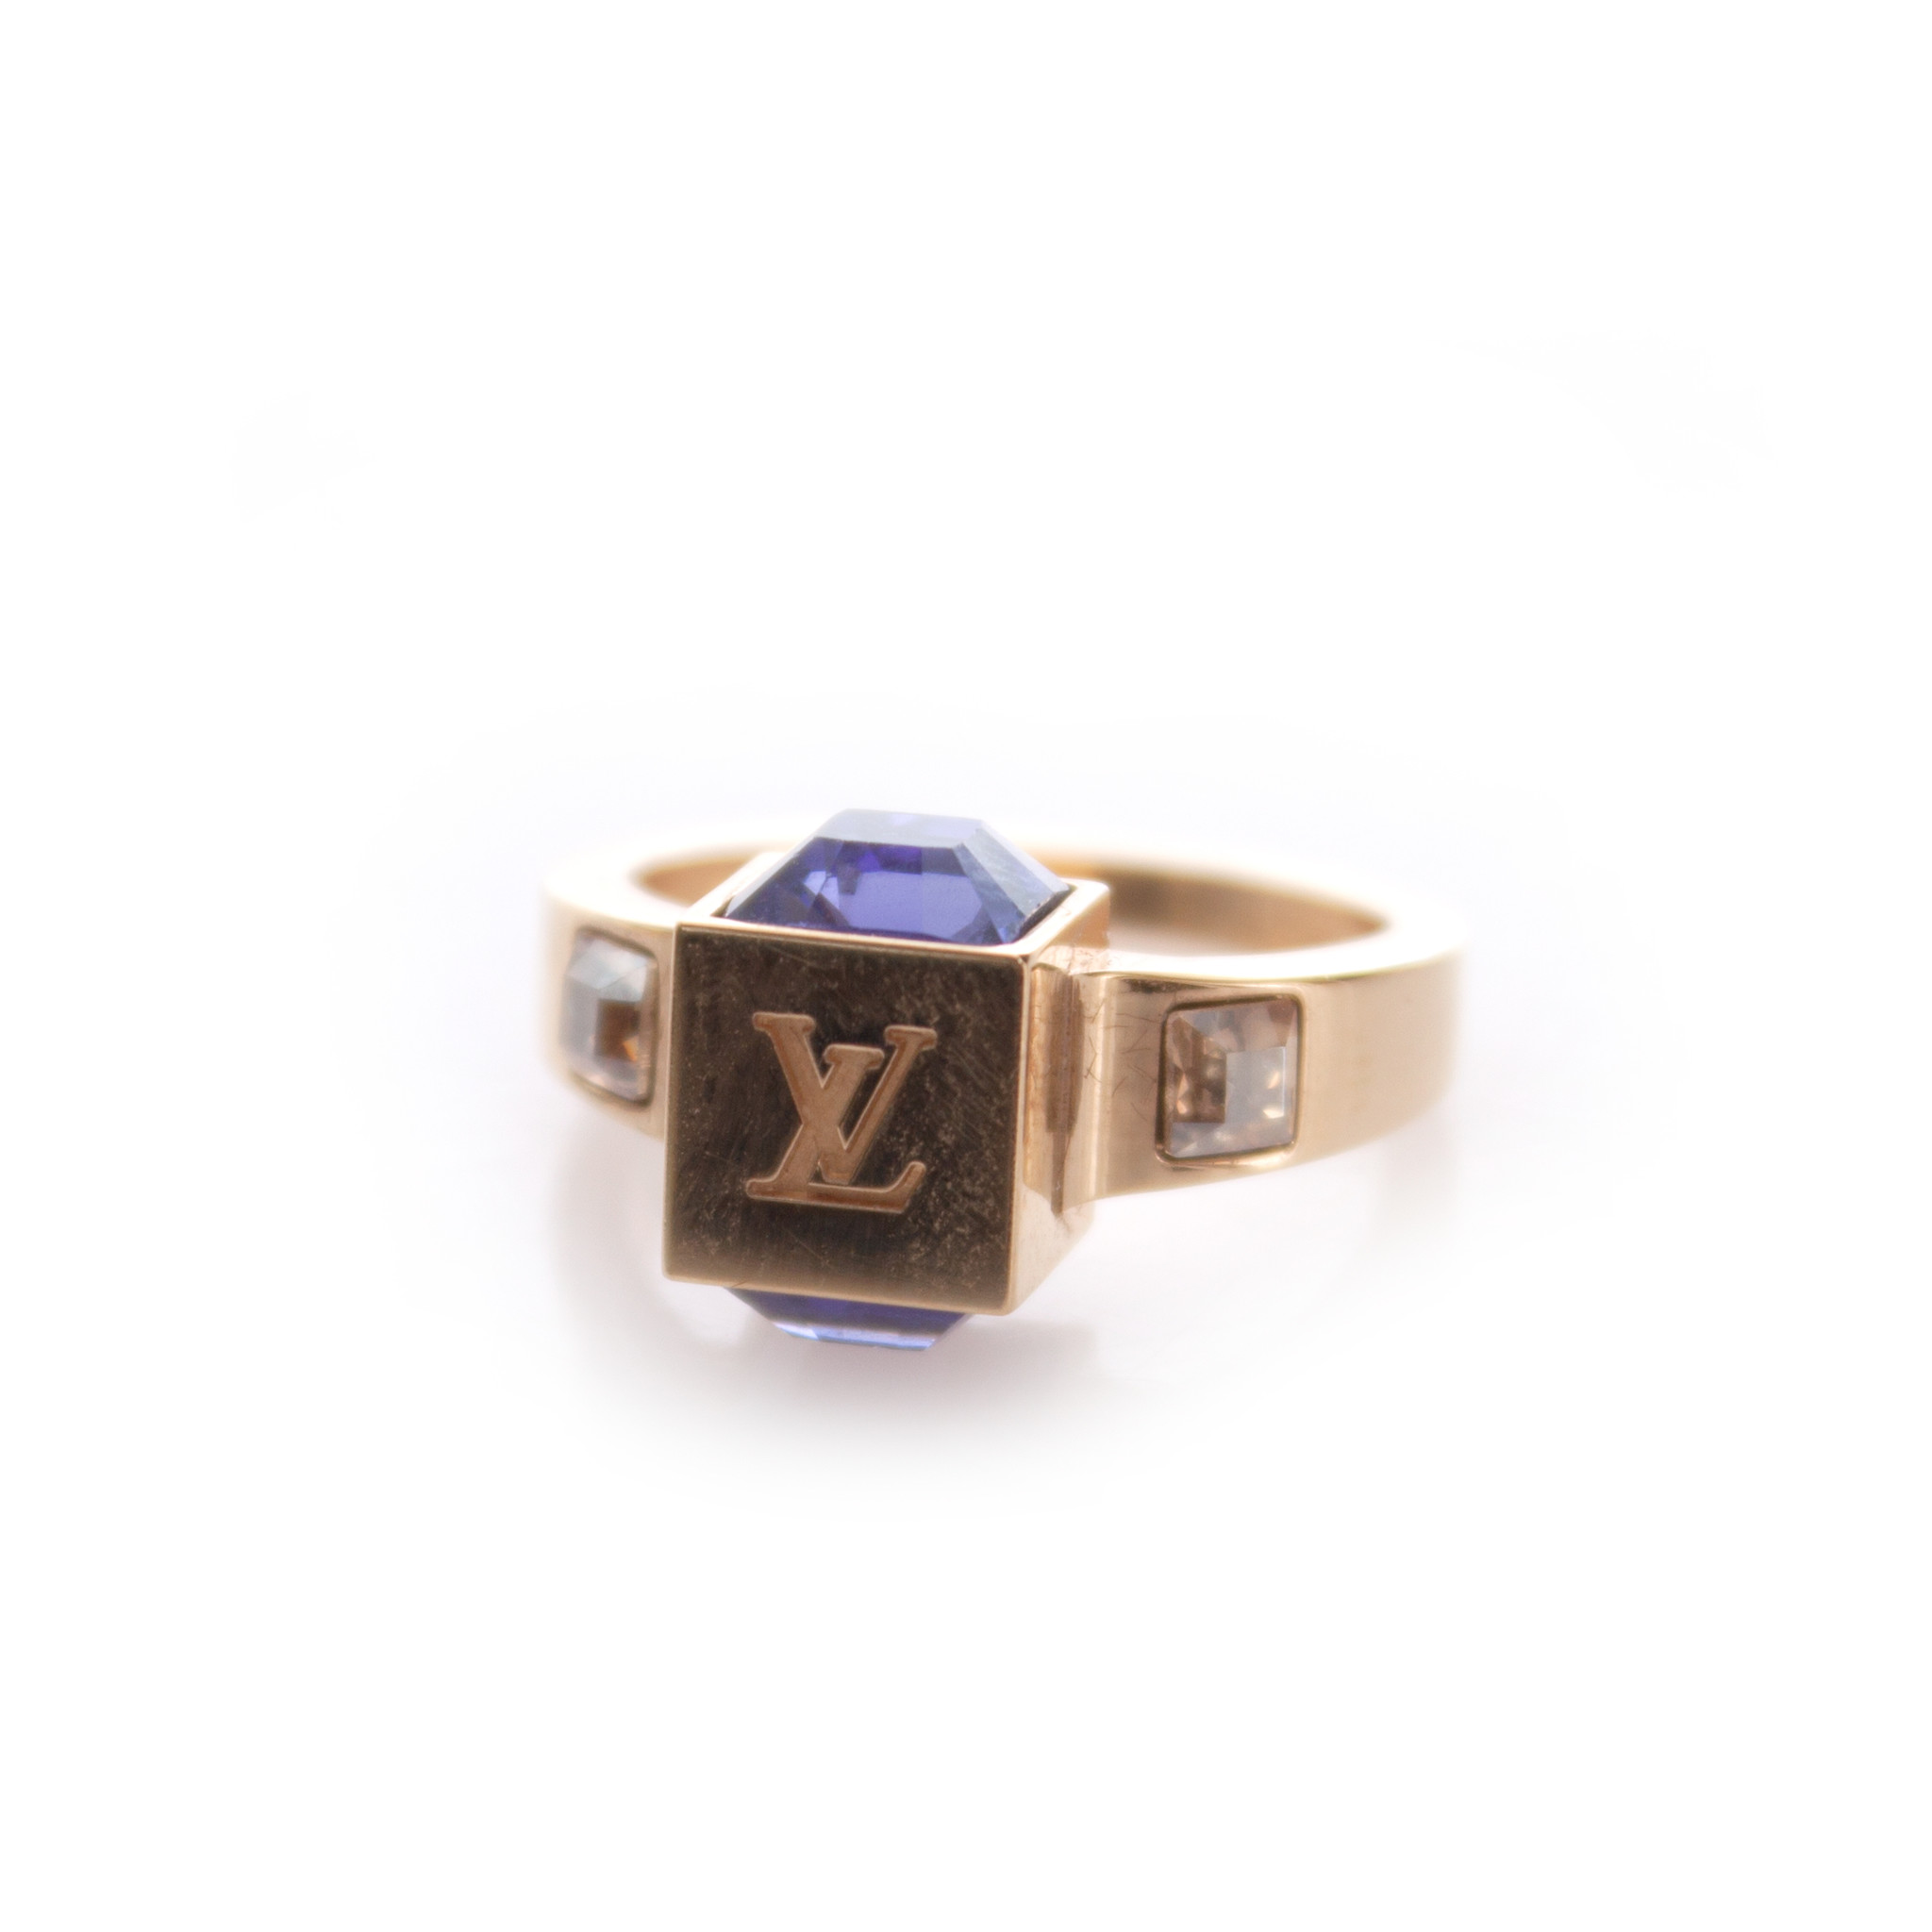 LOUIS VUITTON Gamble Ring Size S Gold-Plated Pink Color Stone